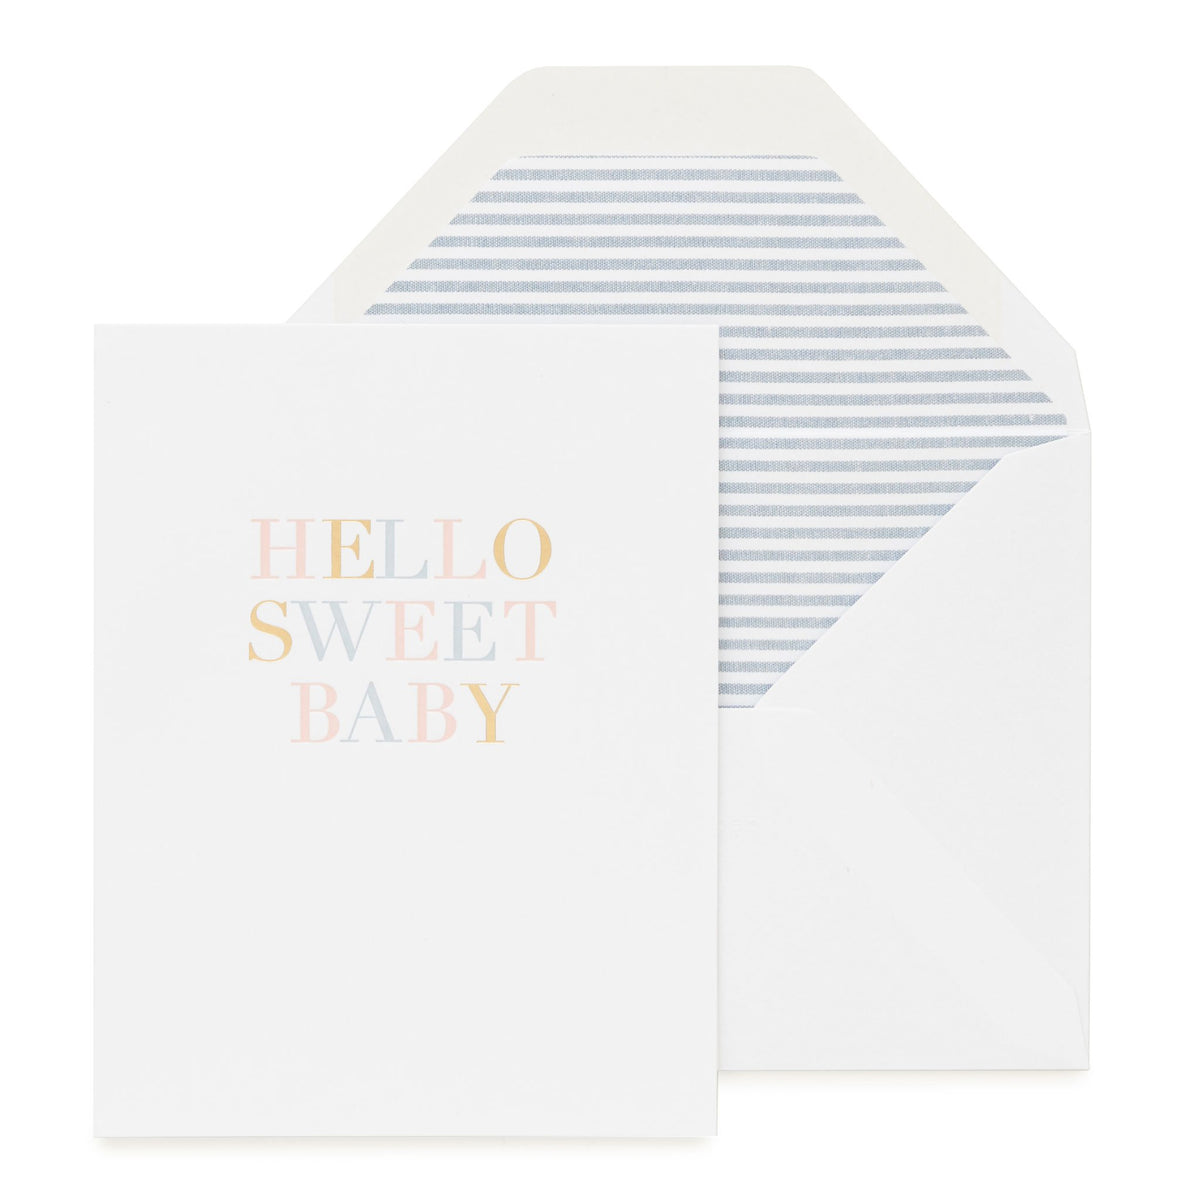 Hello Sweet Baby Card - All She Wrote